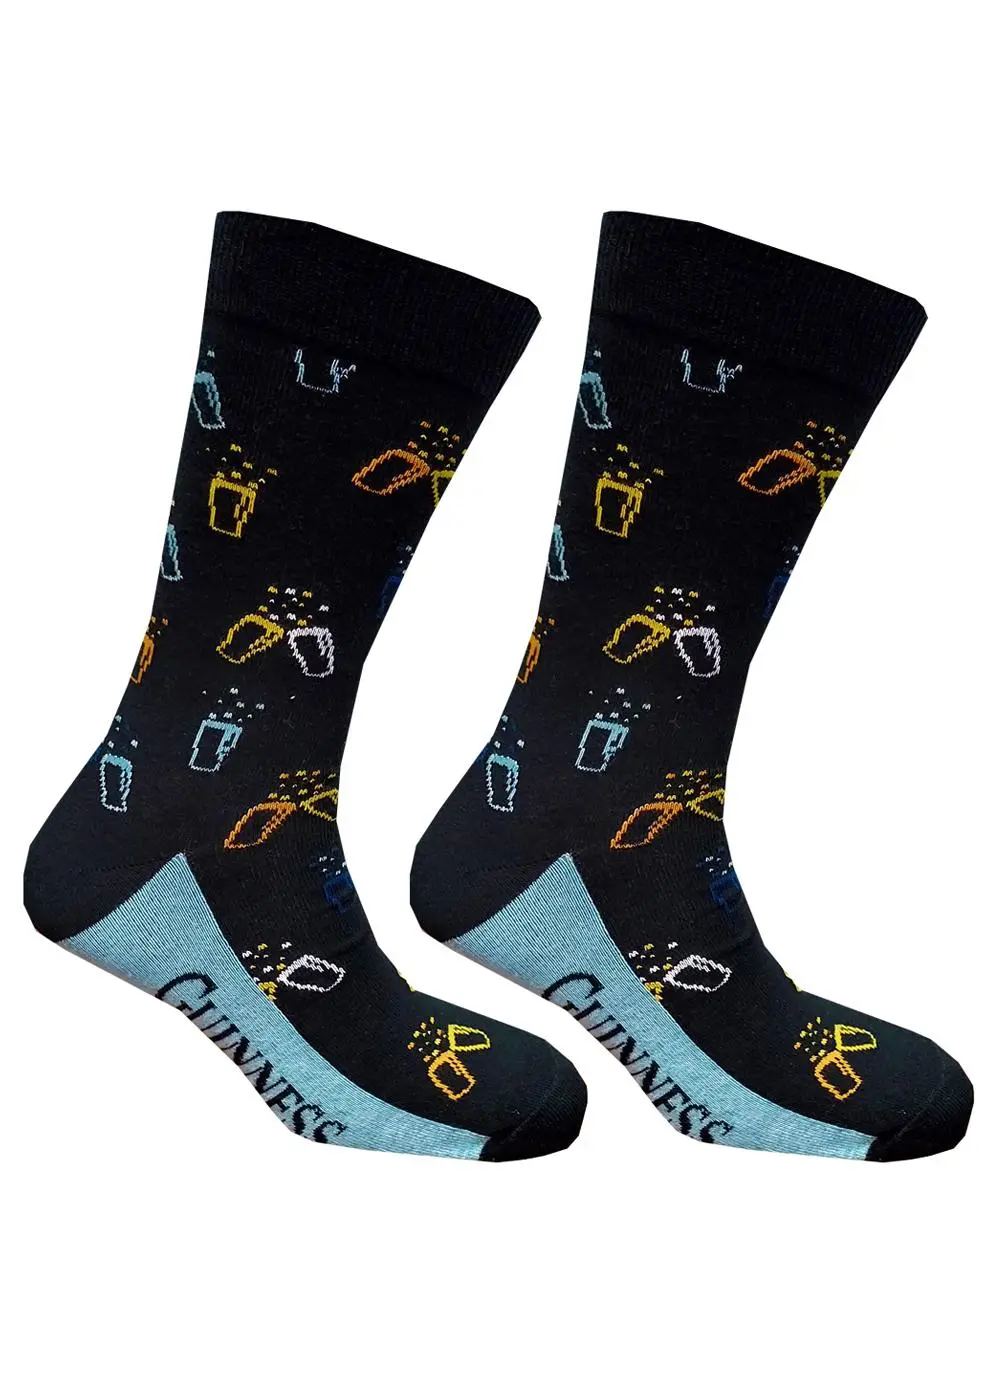 Guinness Boxers and Socks Set with Multicolored Pint Pattern | Blarney